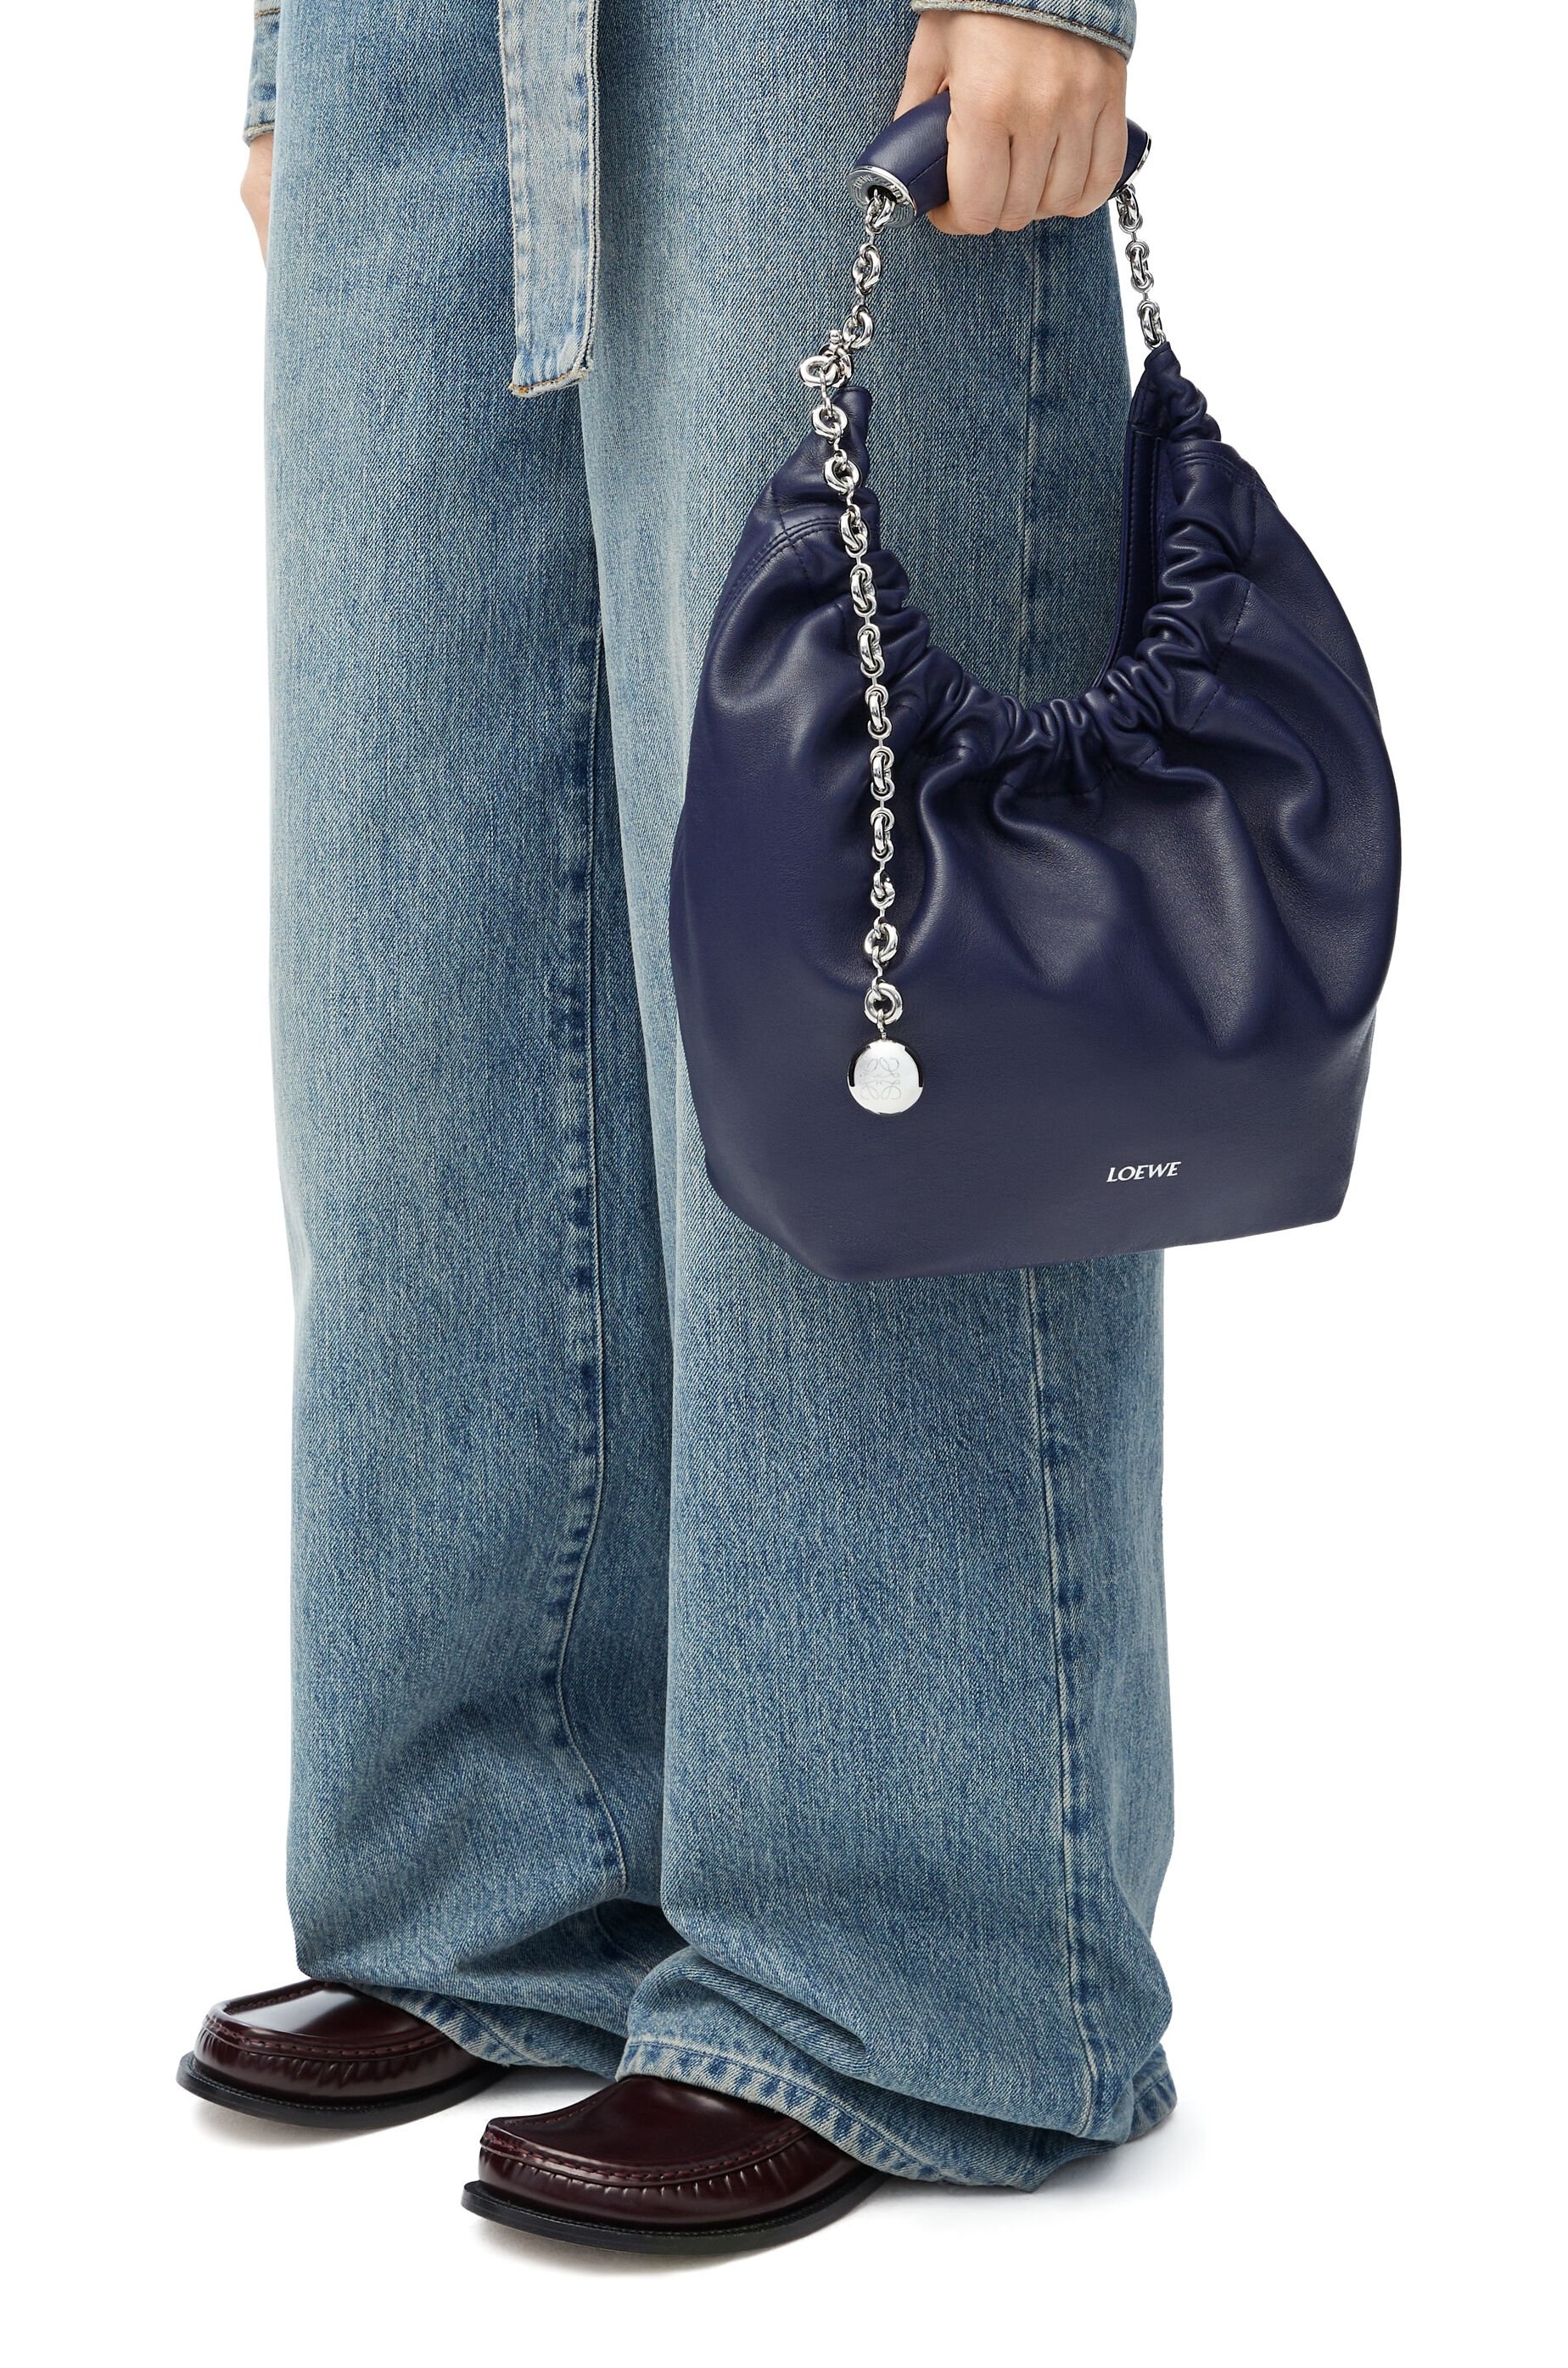 Small Squeeze bag in nappa lambskin - 4